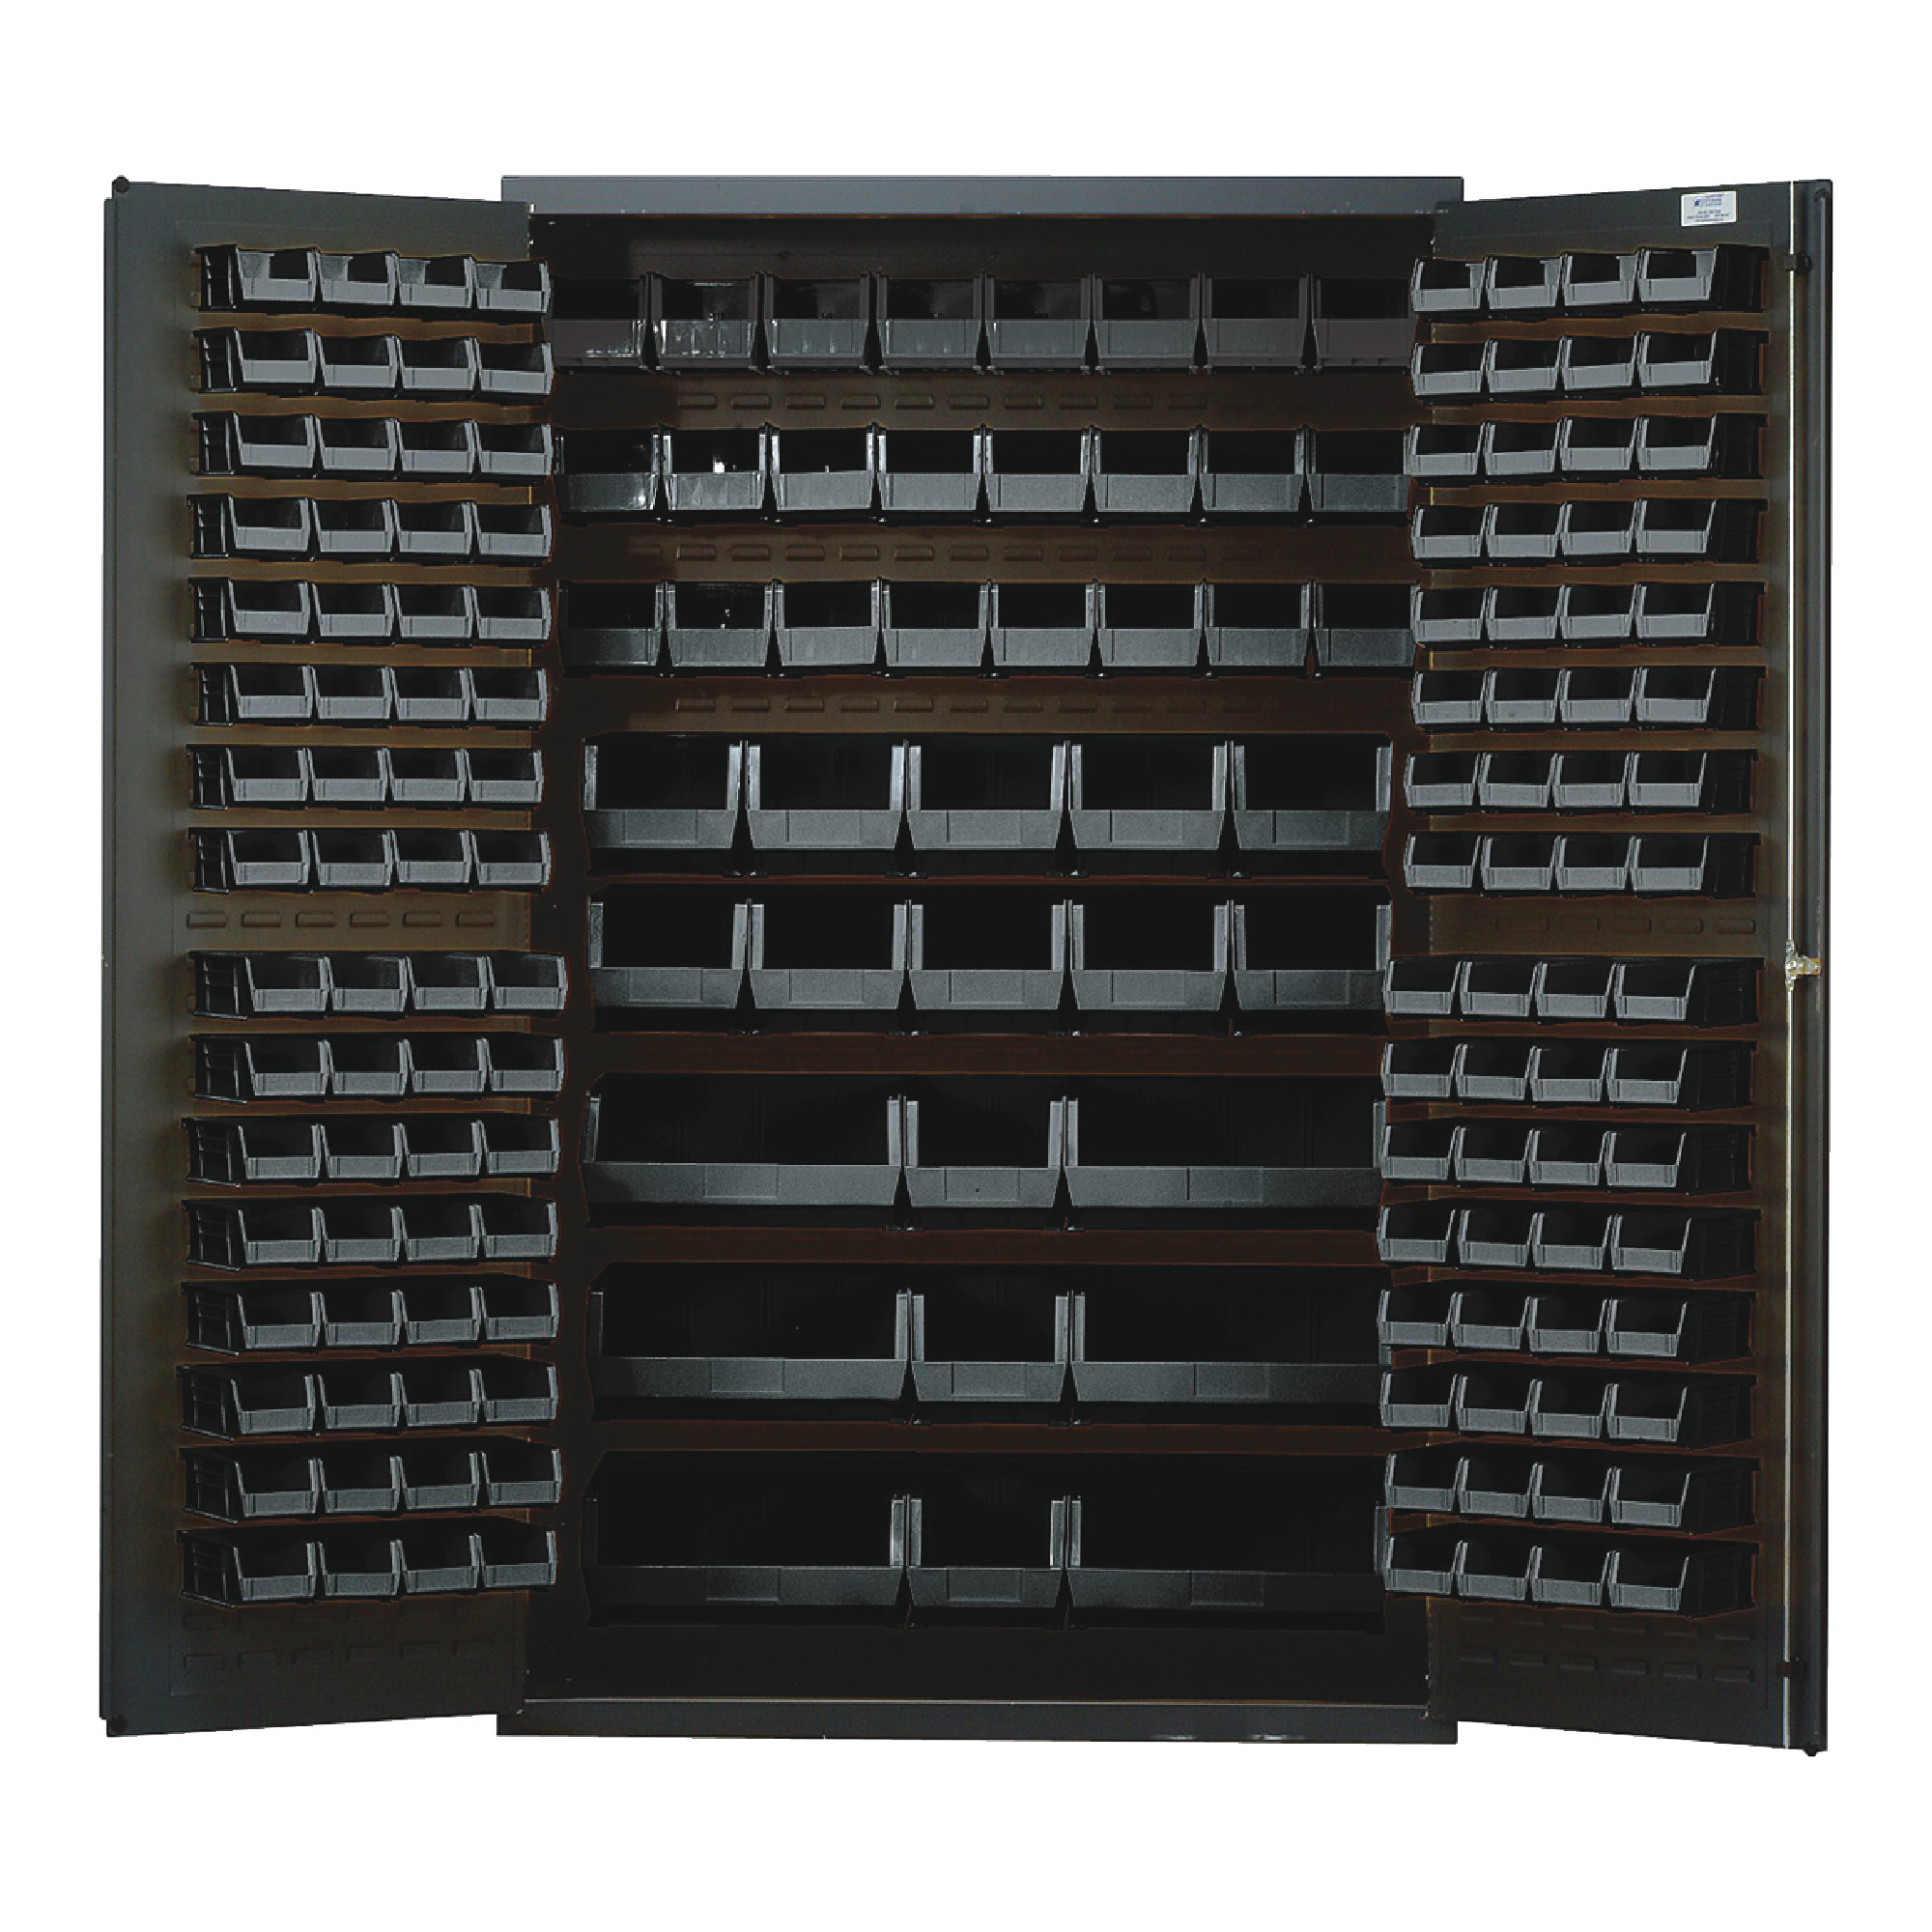 QUANTUM STORAGE SYSTEMS 48" Wide All Welded Floor Cabinet With 171 Black Bins